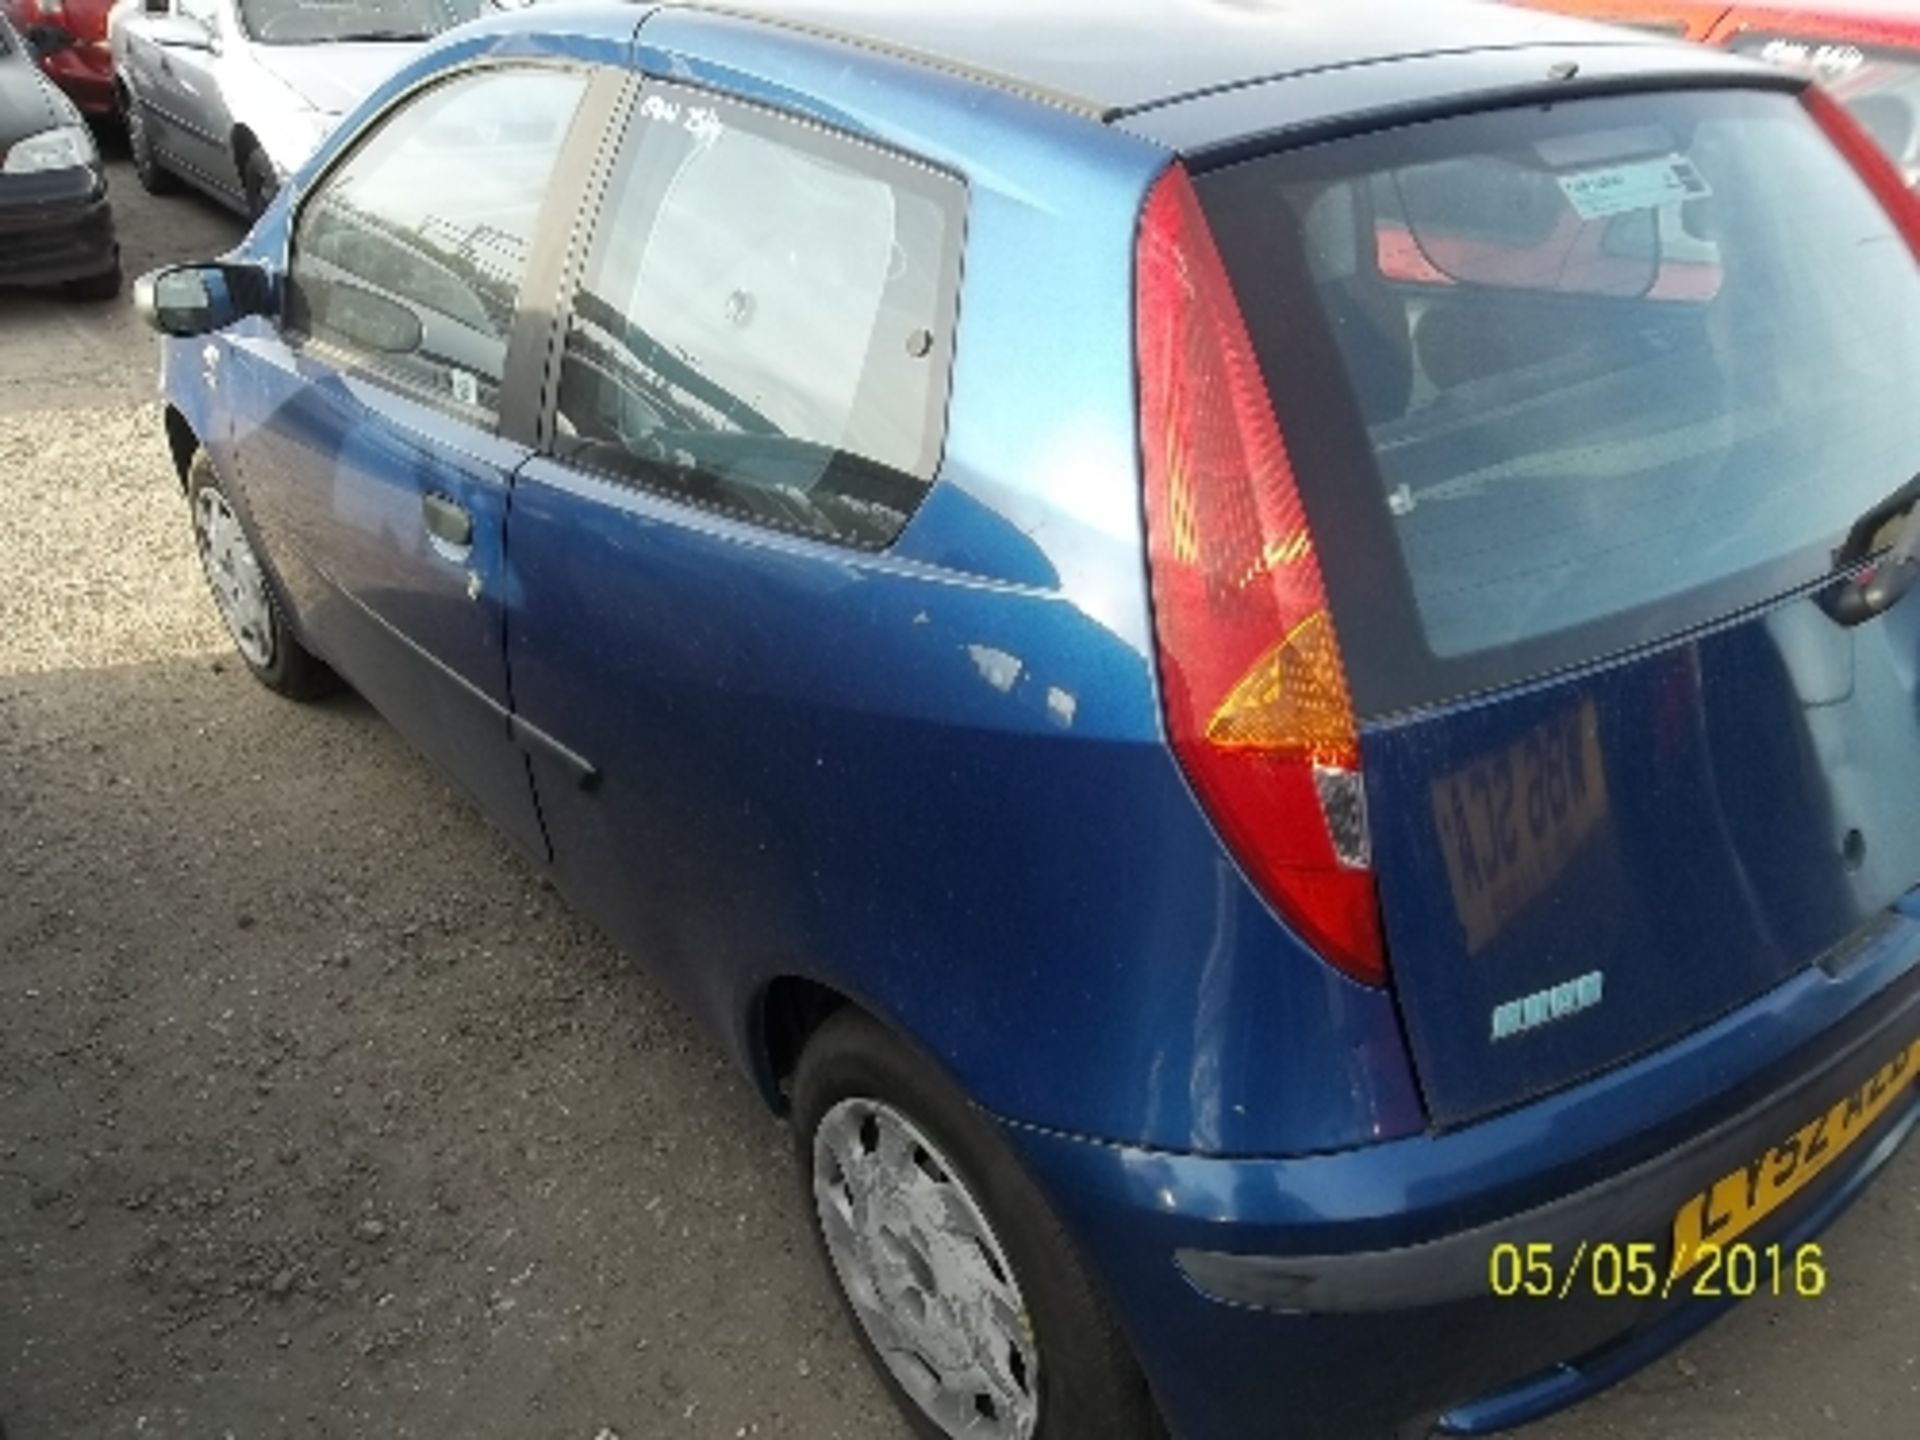 Fiat Punto Active Sport - LY52 AZD Date of Registration: 06.11.2002 1242cc, petrol, manual, blue - Image 4 of 4